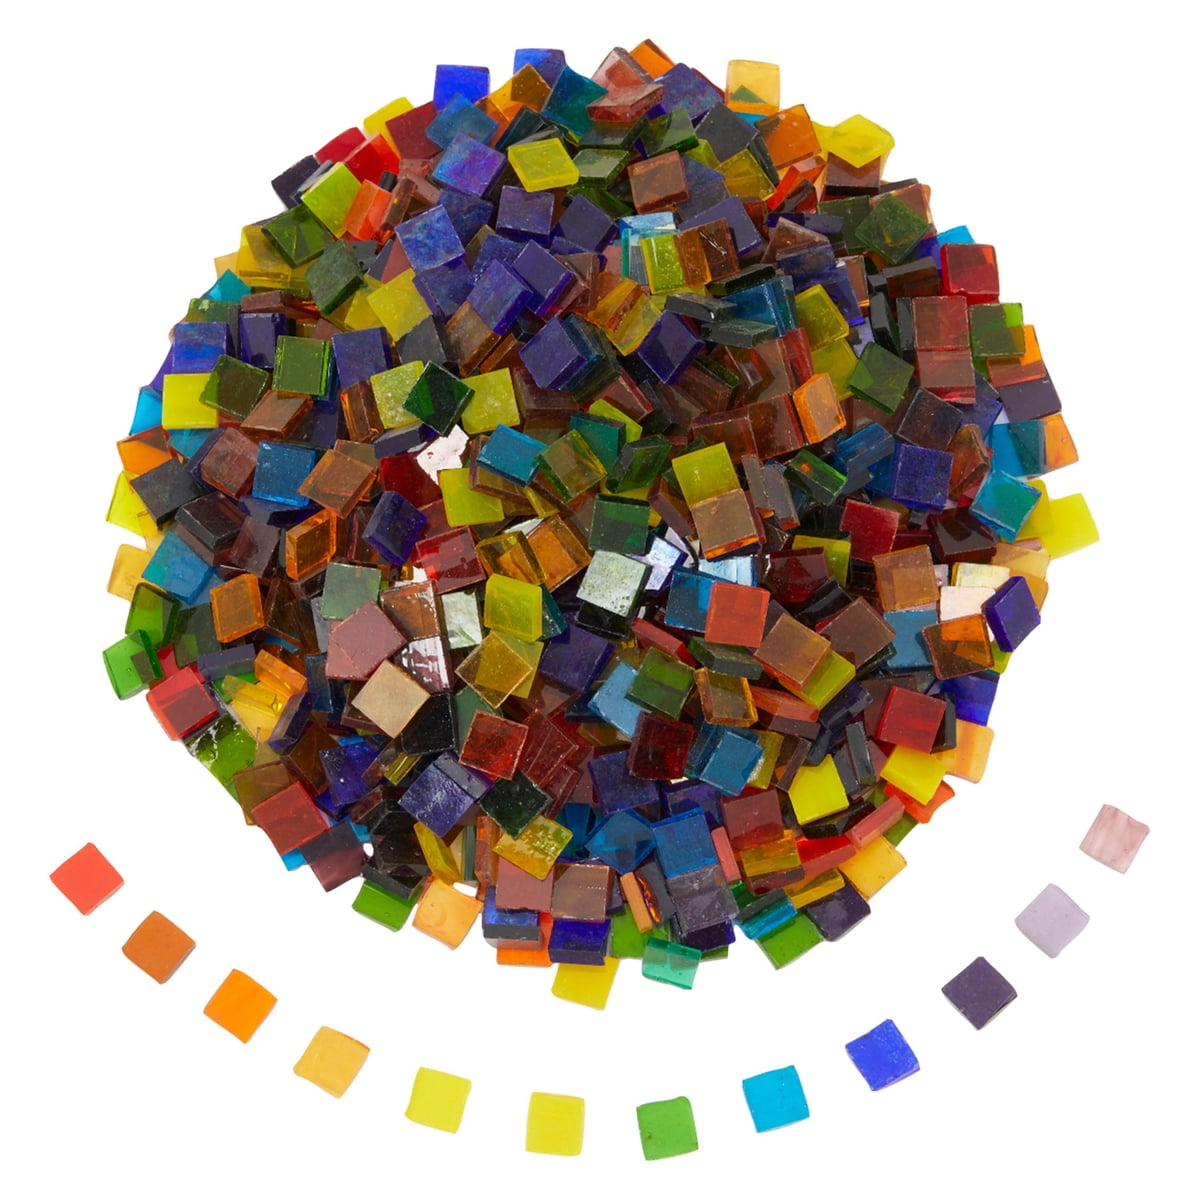 100g Multicolored Stained Glass Pieces Mosaic Tiles for Art Decor Crafts DIY 